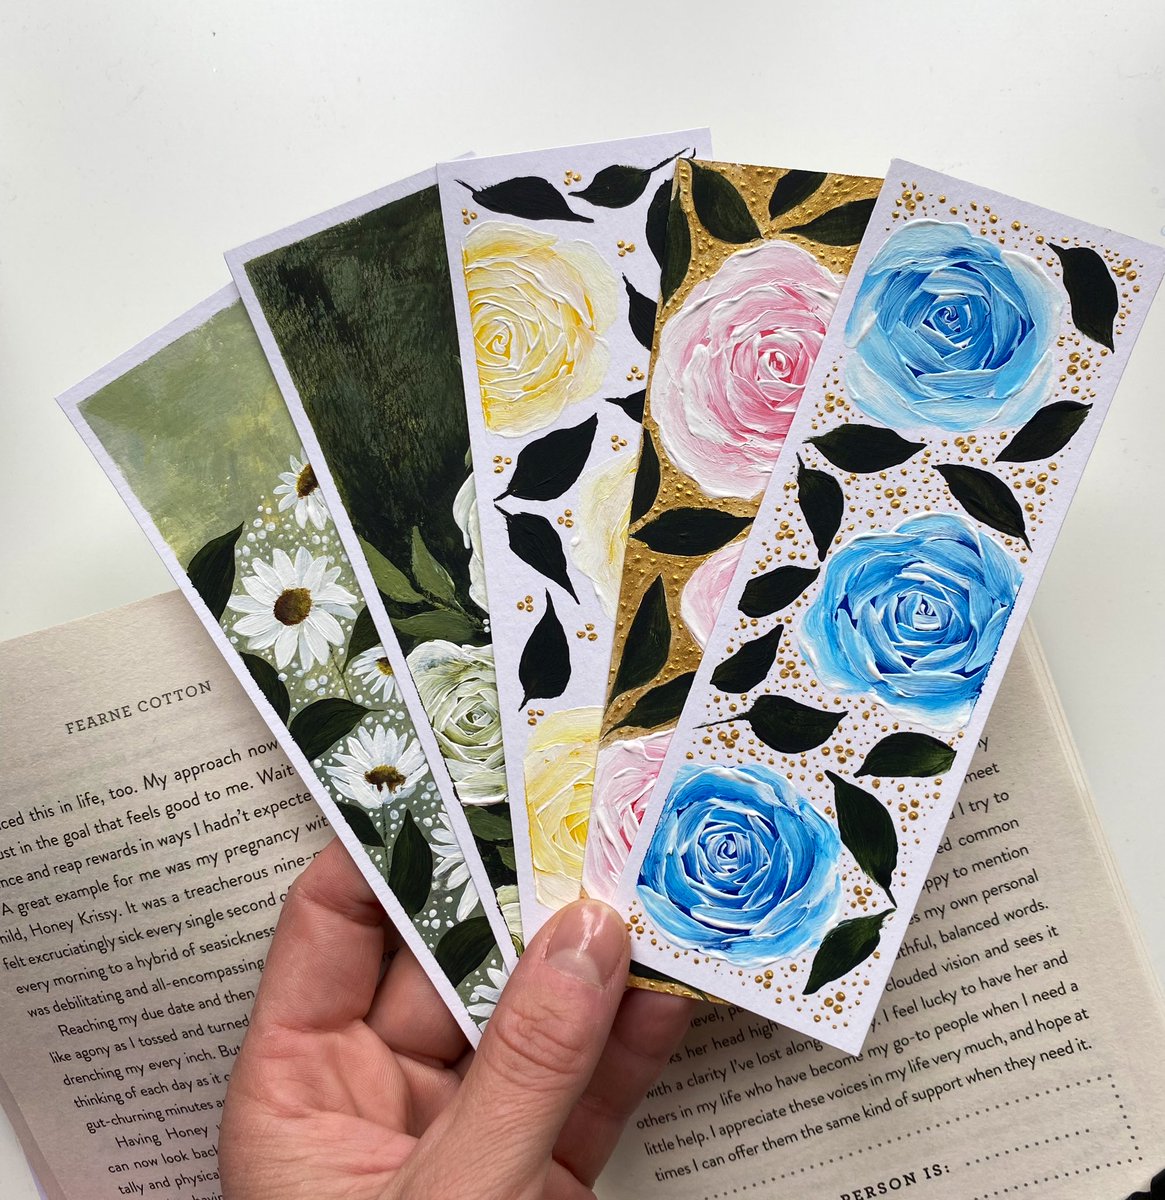 🌹📚 Love getting lost in the world of books? 🎨🌹Excited to share with you my new Bookmarks. Tap the link in bio to get yours now! 
#bookishgifts #handmadebookmark #bookwormsoftiktok #giftsforreaders #booknerdgift #booklovergift #handmadebookmarks #floralart